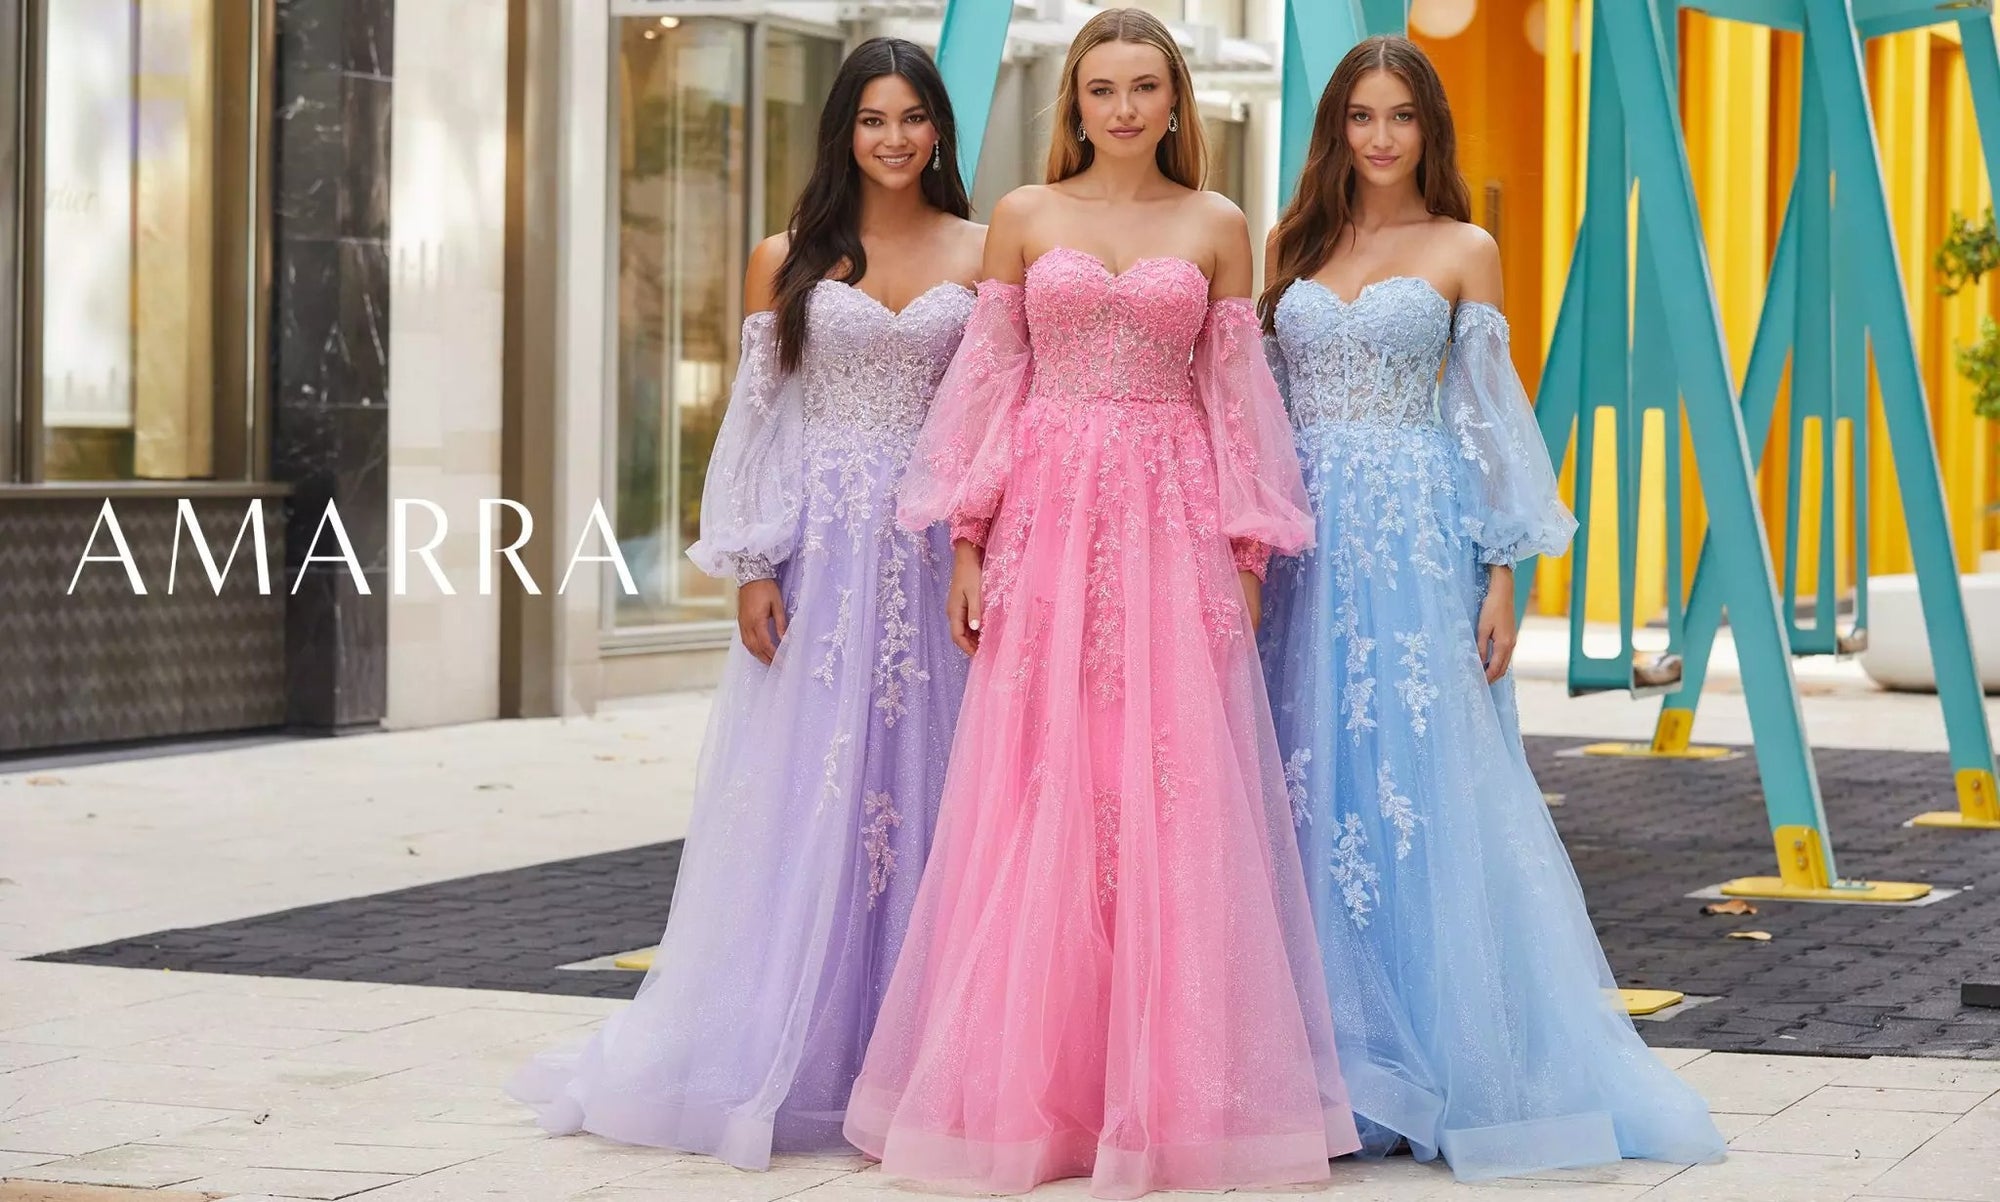 Get A Chic Look With Trending Boho Prom Dresses